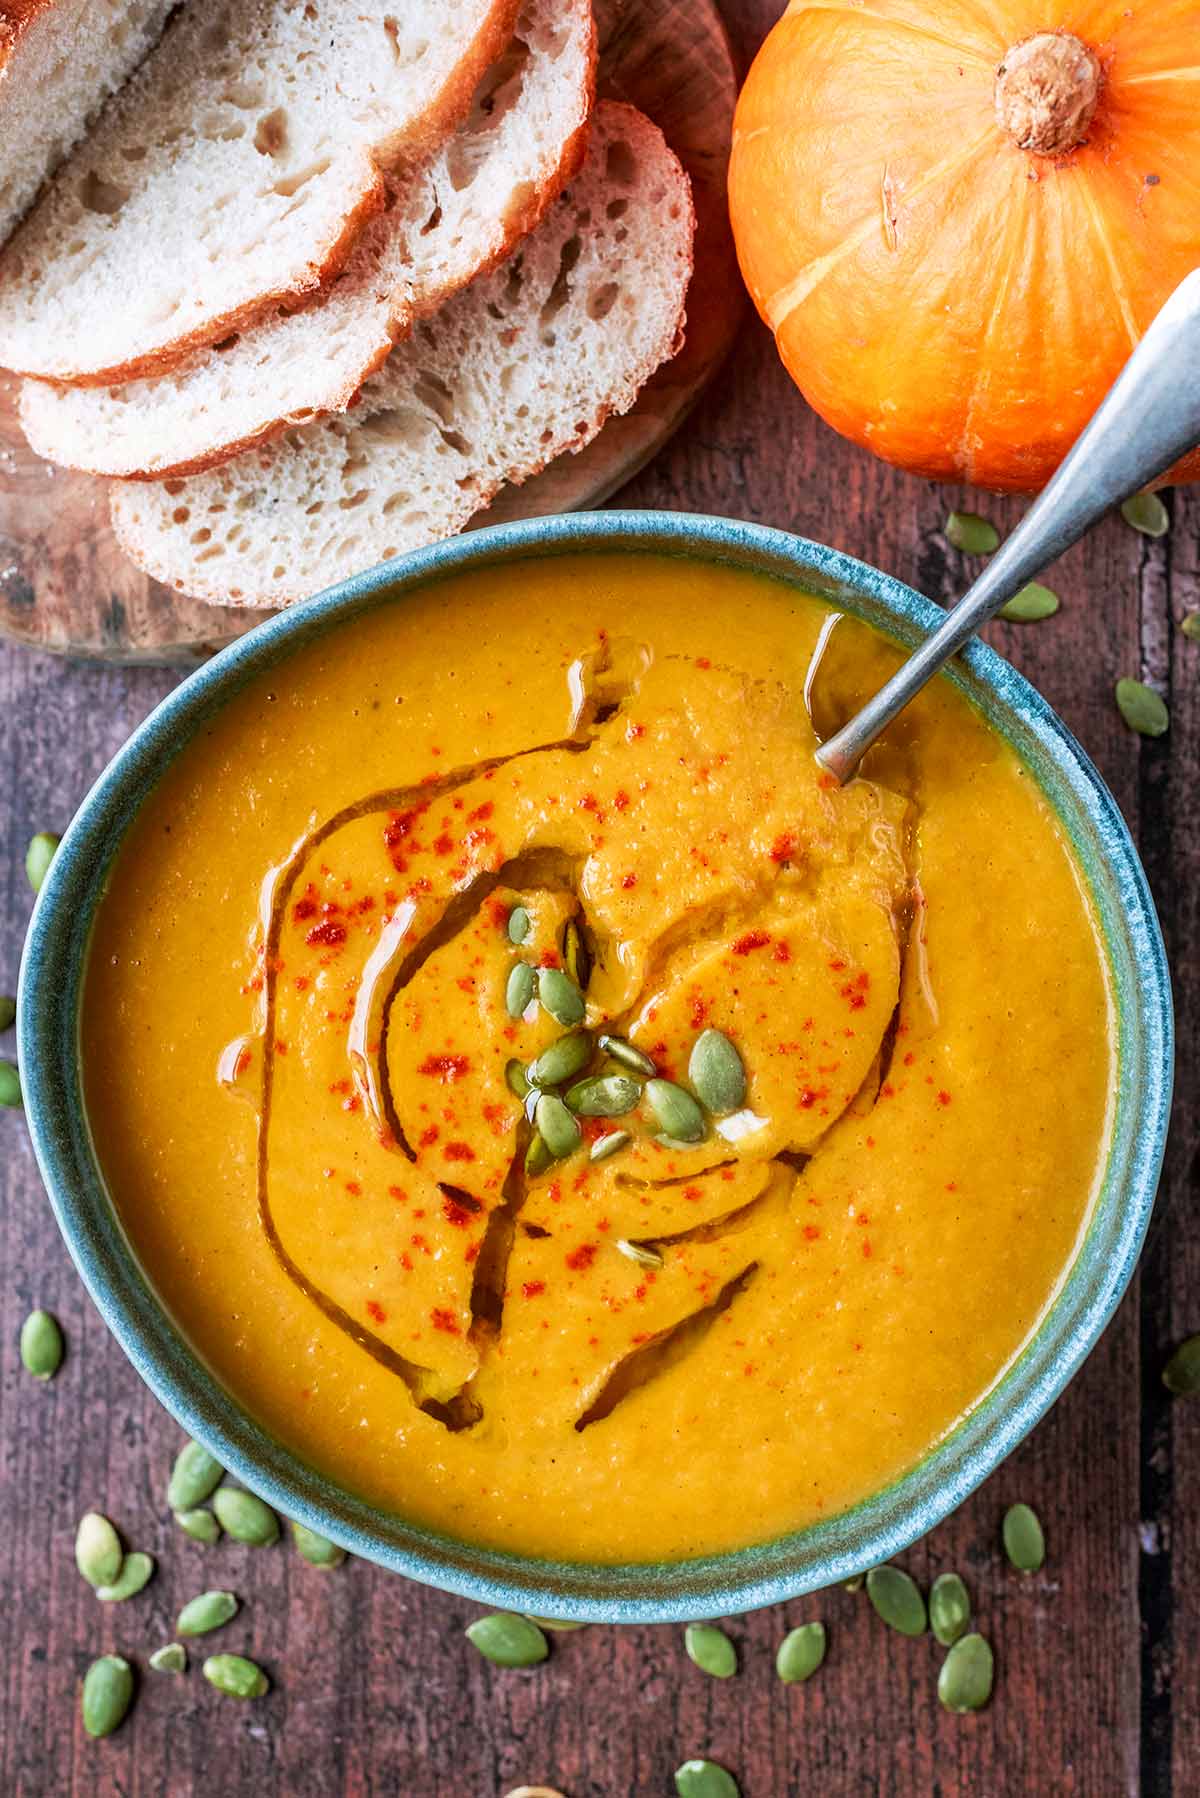 A bowl of pumpkin soup next to a whole pumpkin and a loaf of bread.